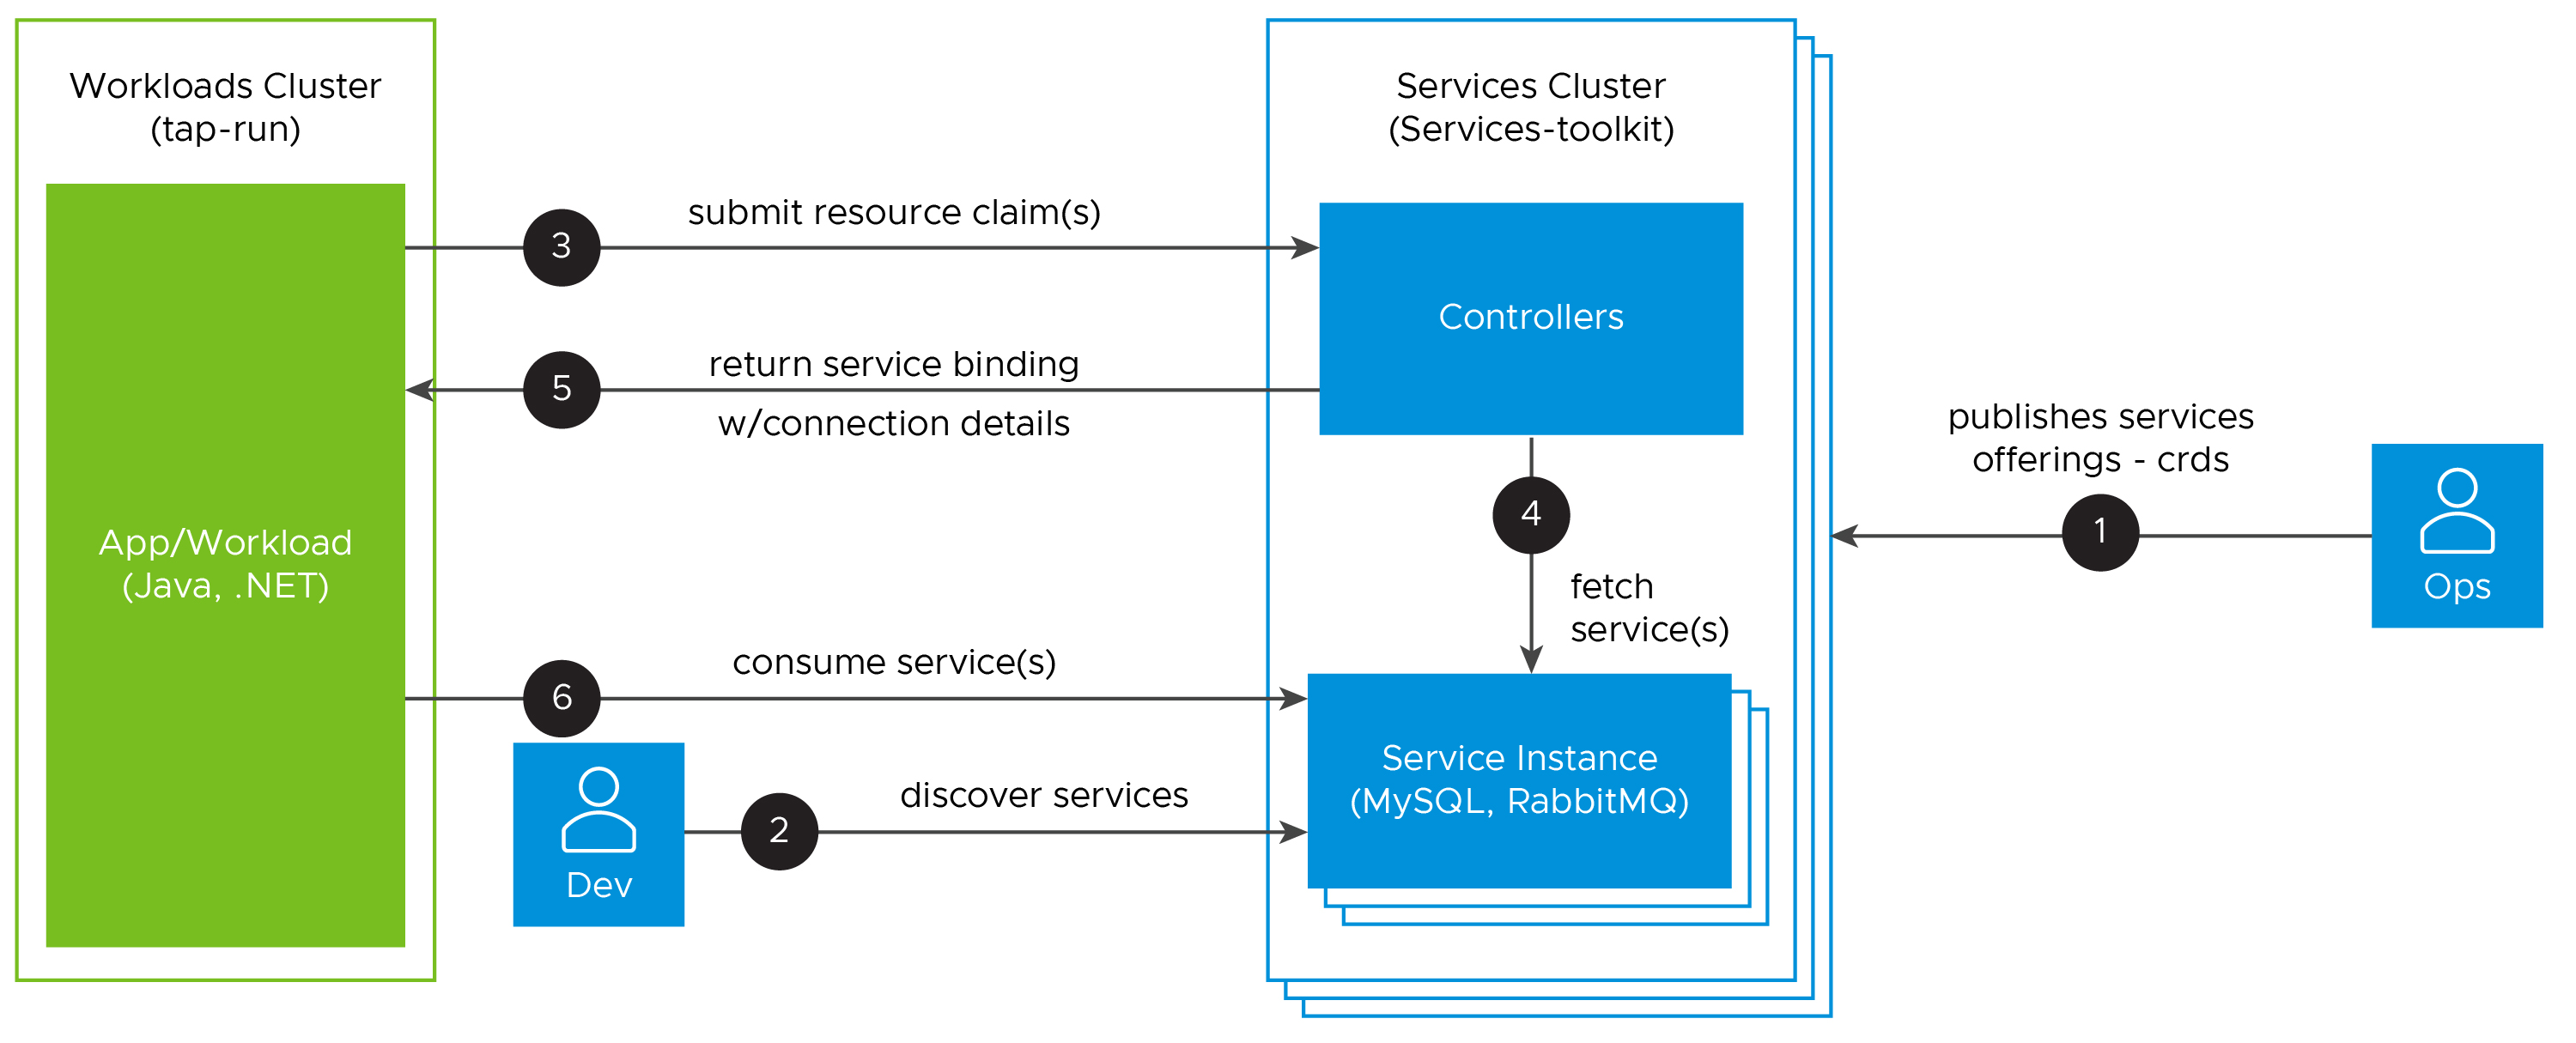 External services clusters